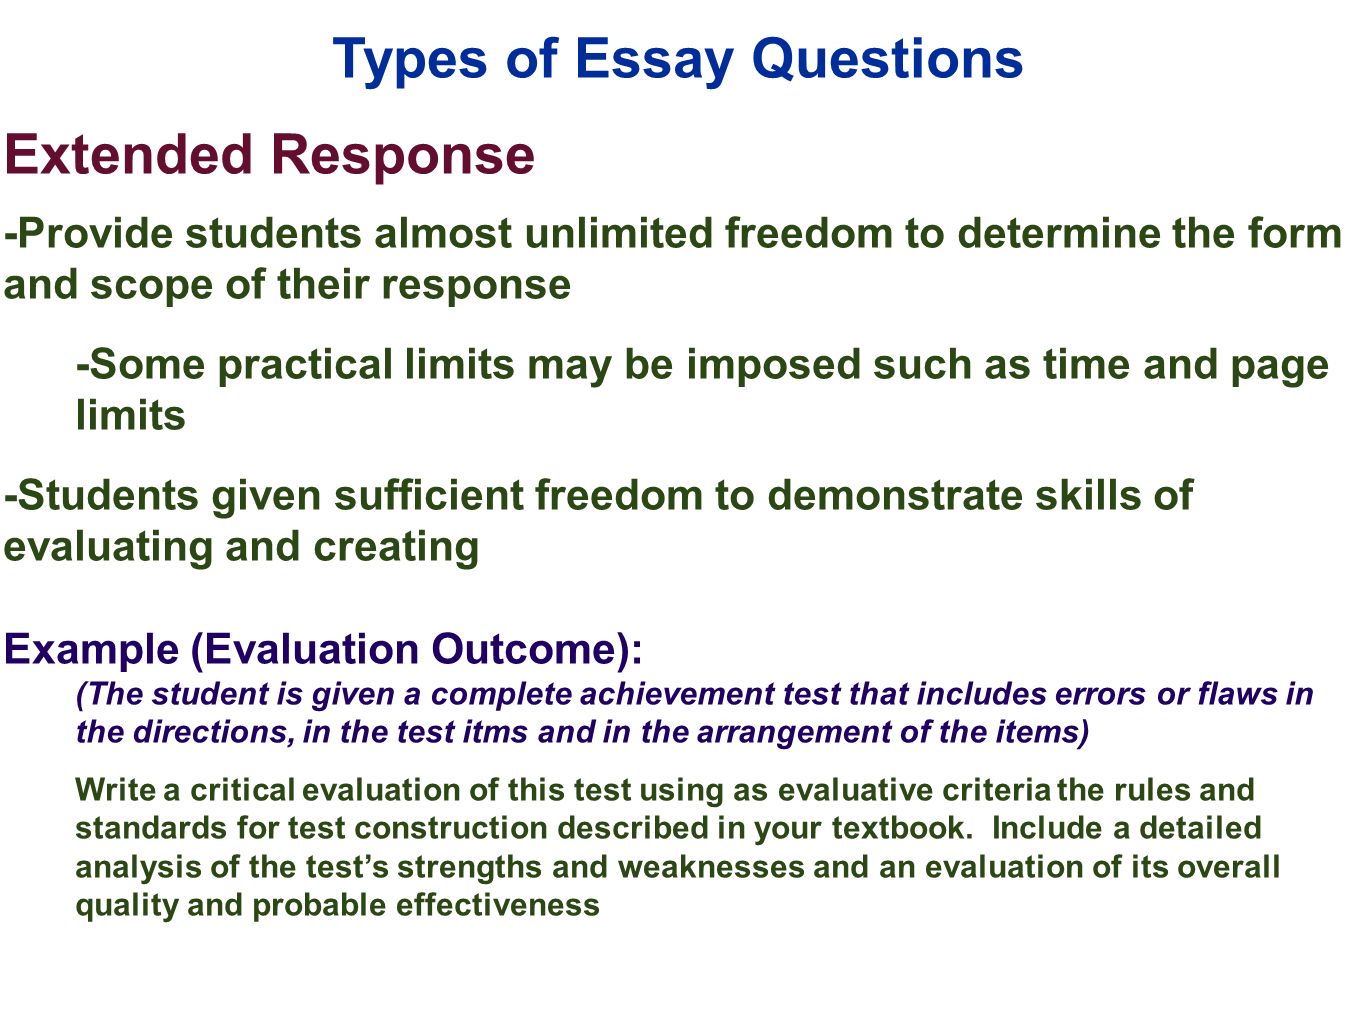 Sample extended response essay questions